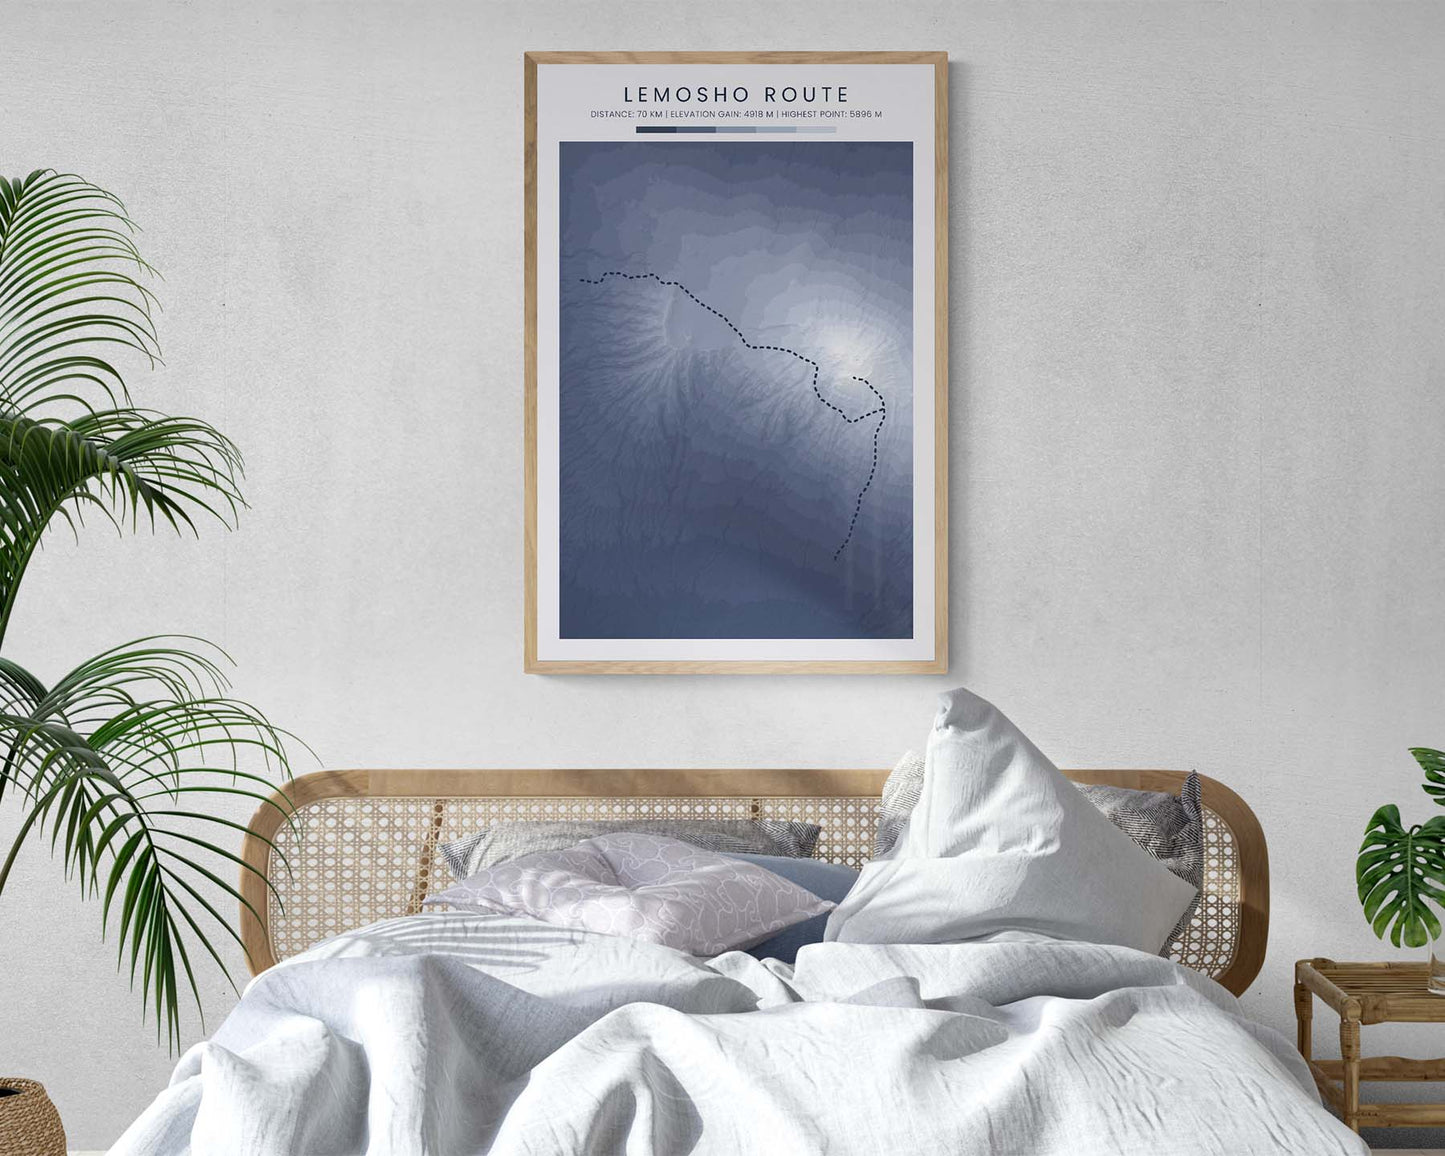 Lemosho Route (Tanzania) Walk Wall Decor with Shaded Relief Map in Modern Bedroom Decor